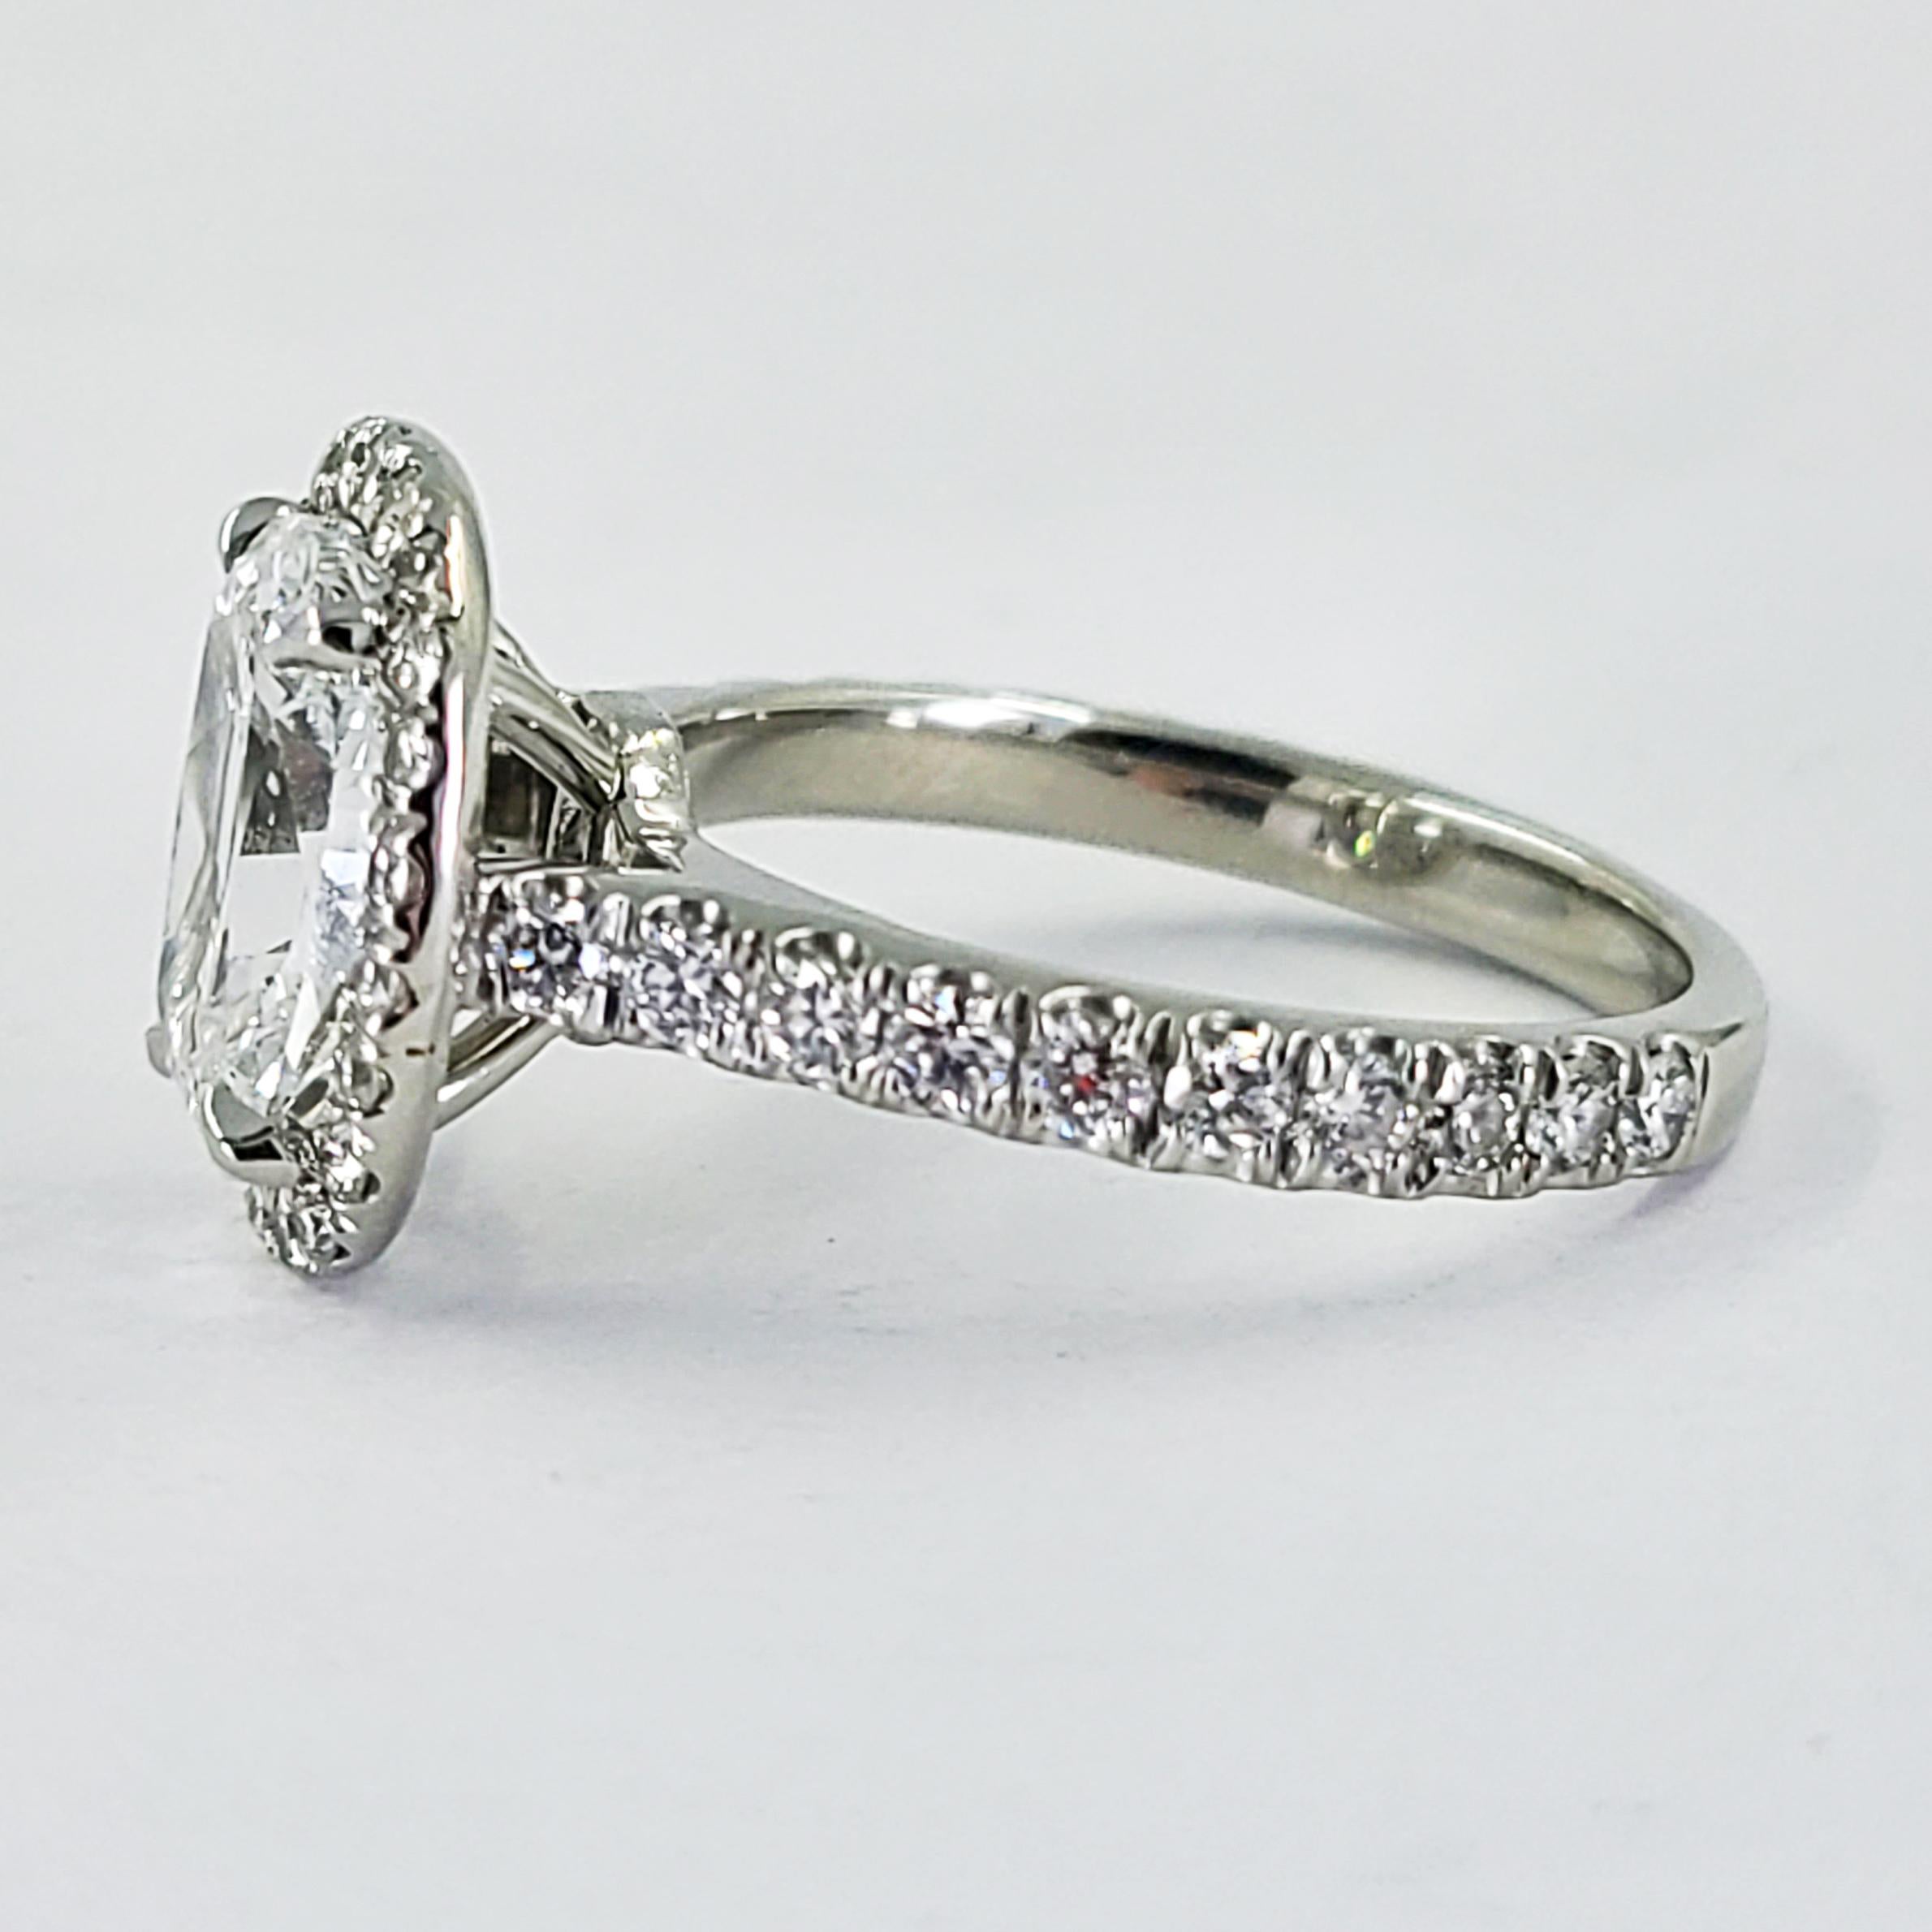 Platinum Halo Engagement Ring Featuring A 2.26 Carat Cushion Cut Diamond GIA Graded (Report #2131718400) As E Color & SI2 Clarity Accented By 42 Round Brilliant Cut Diamonds Of VS Clarity & F/G Color Totaling An Additional 0.74 Carats. Current